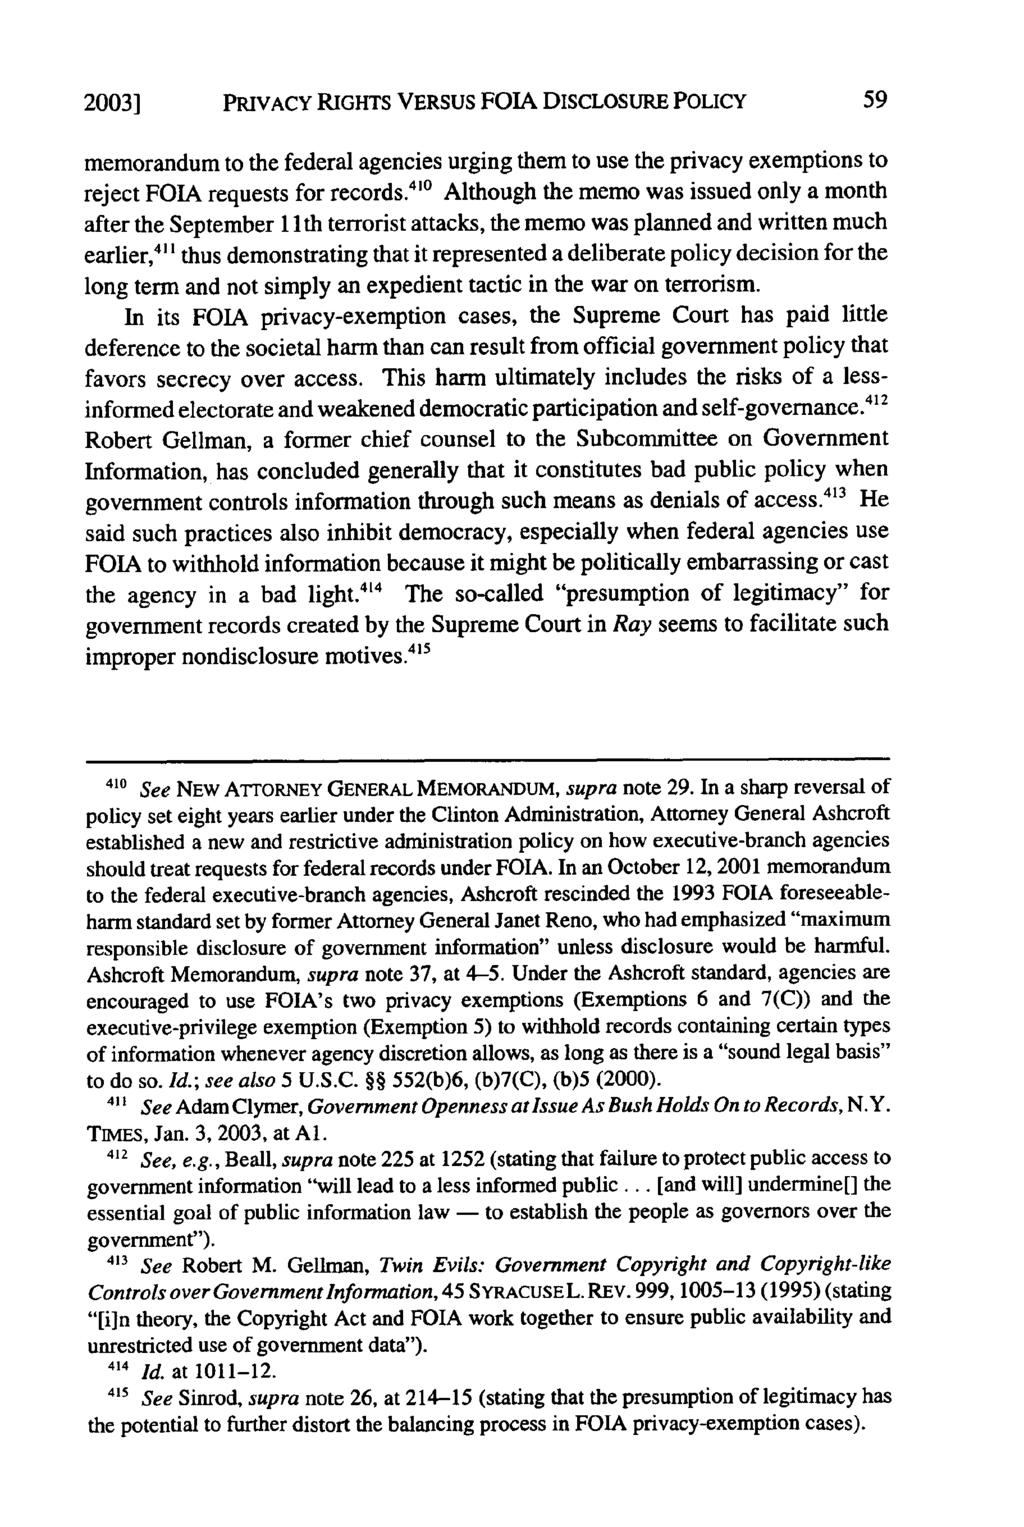 2003] PRIVACY RIGHTS VERSUS FOIA DISCLOSURE POLICY memorandum to the federal agencies urging them to use the privacy exemptions to reject FOIA requests for records.